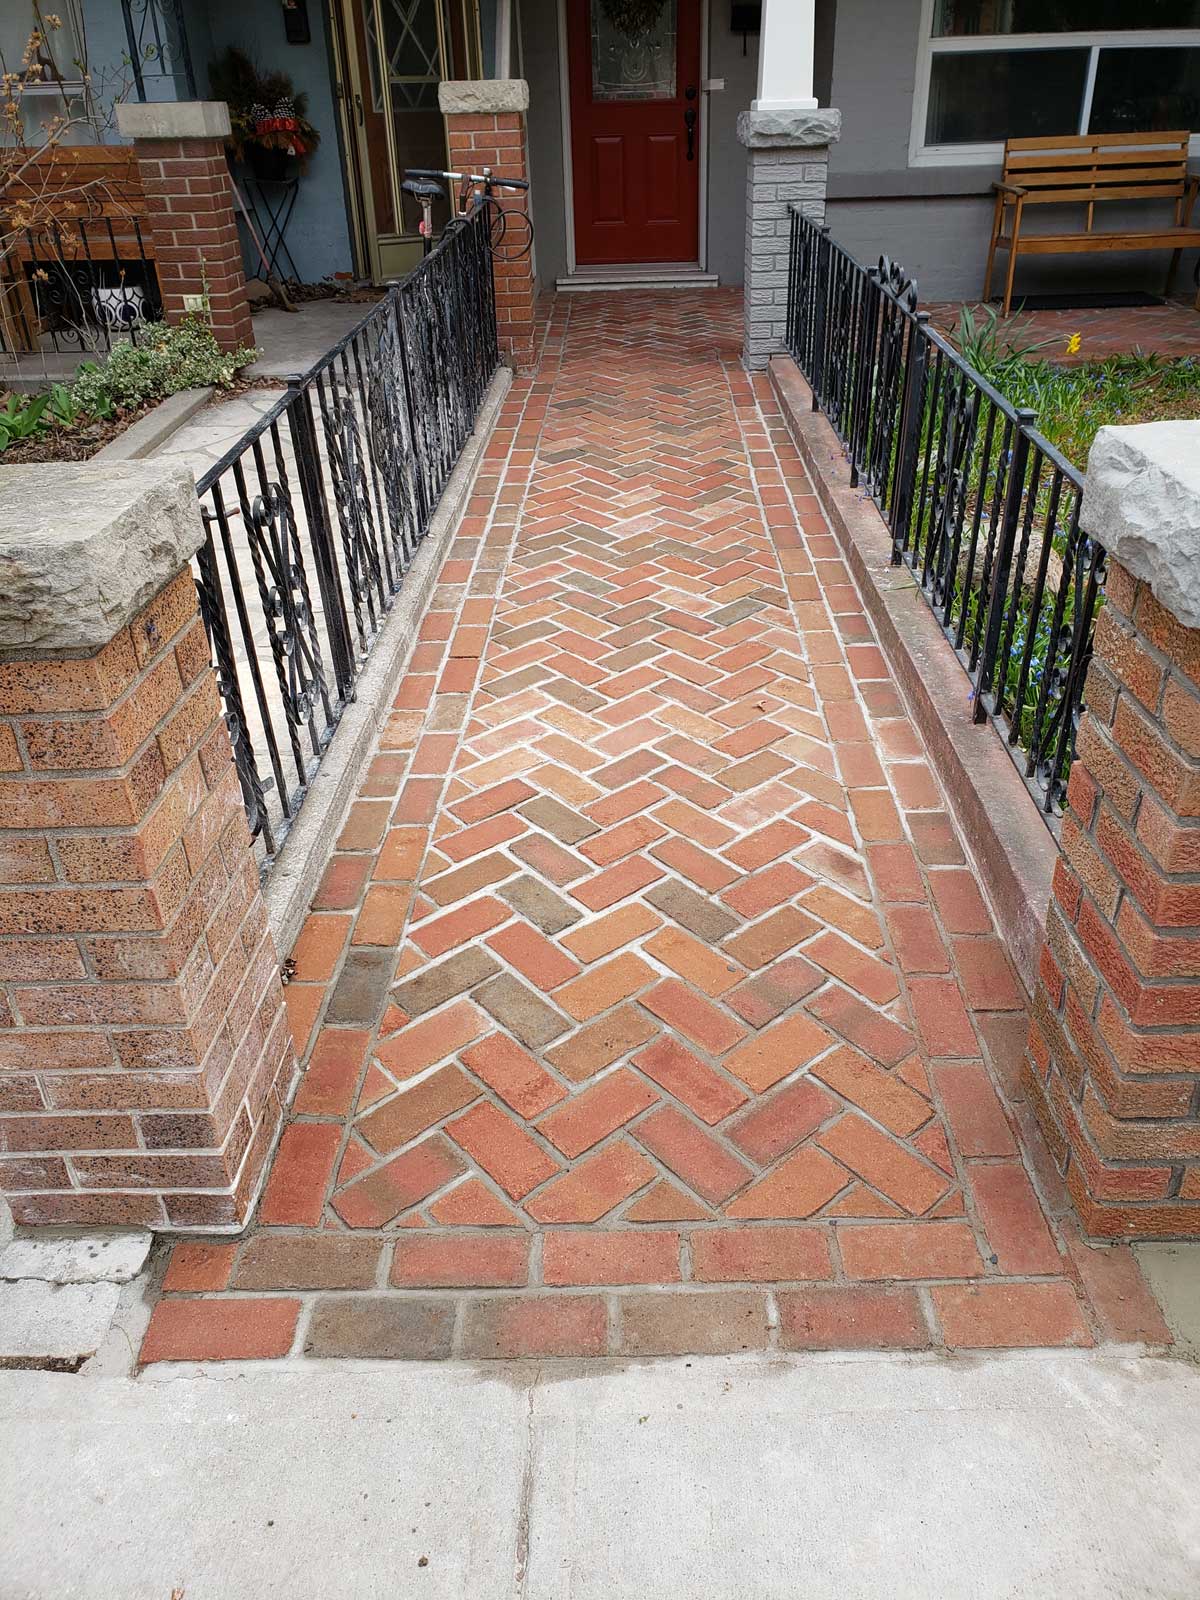 patterned brick pathway in front of home lined by low black fences